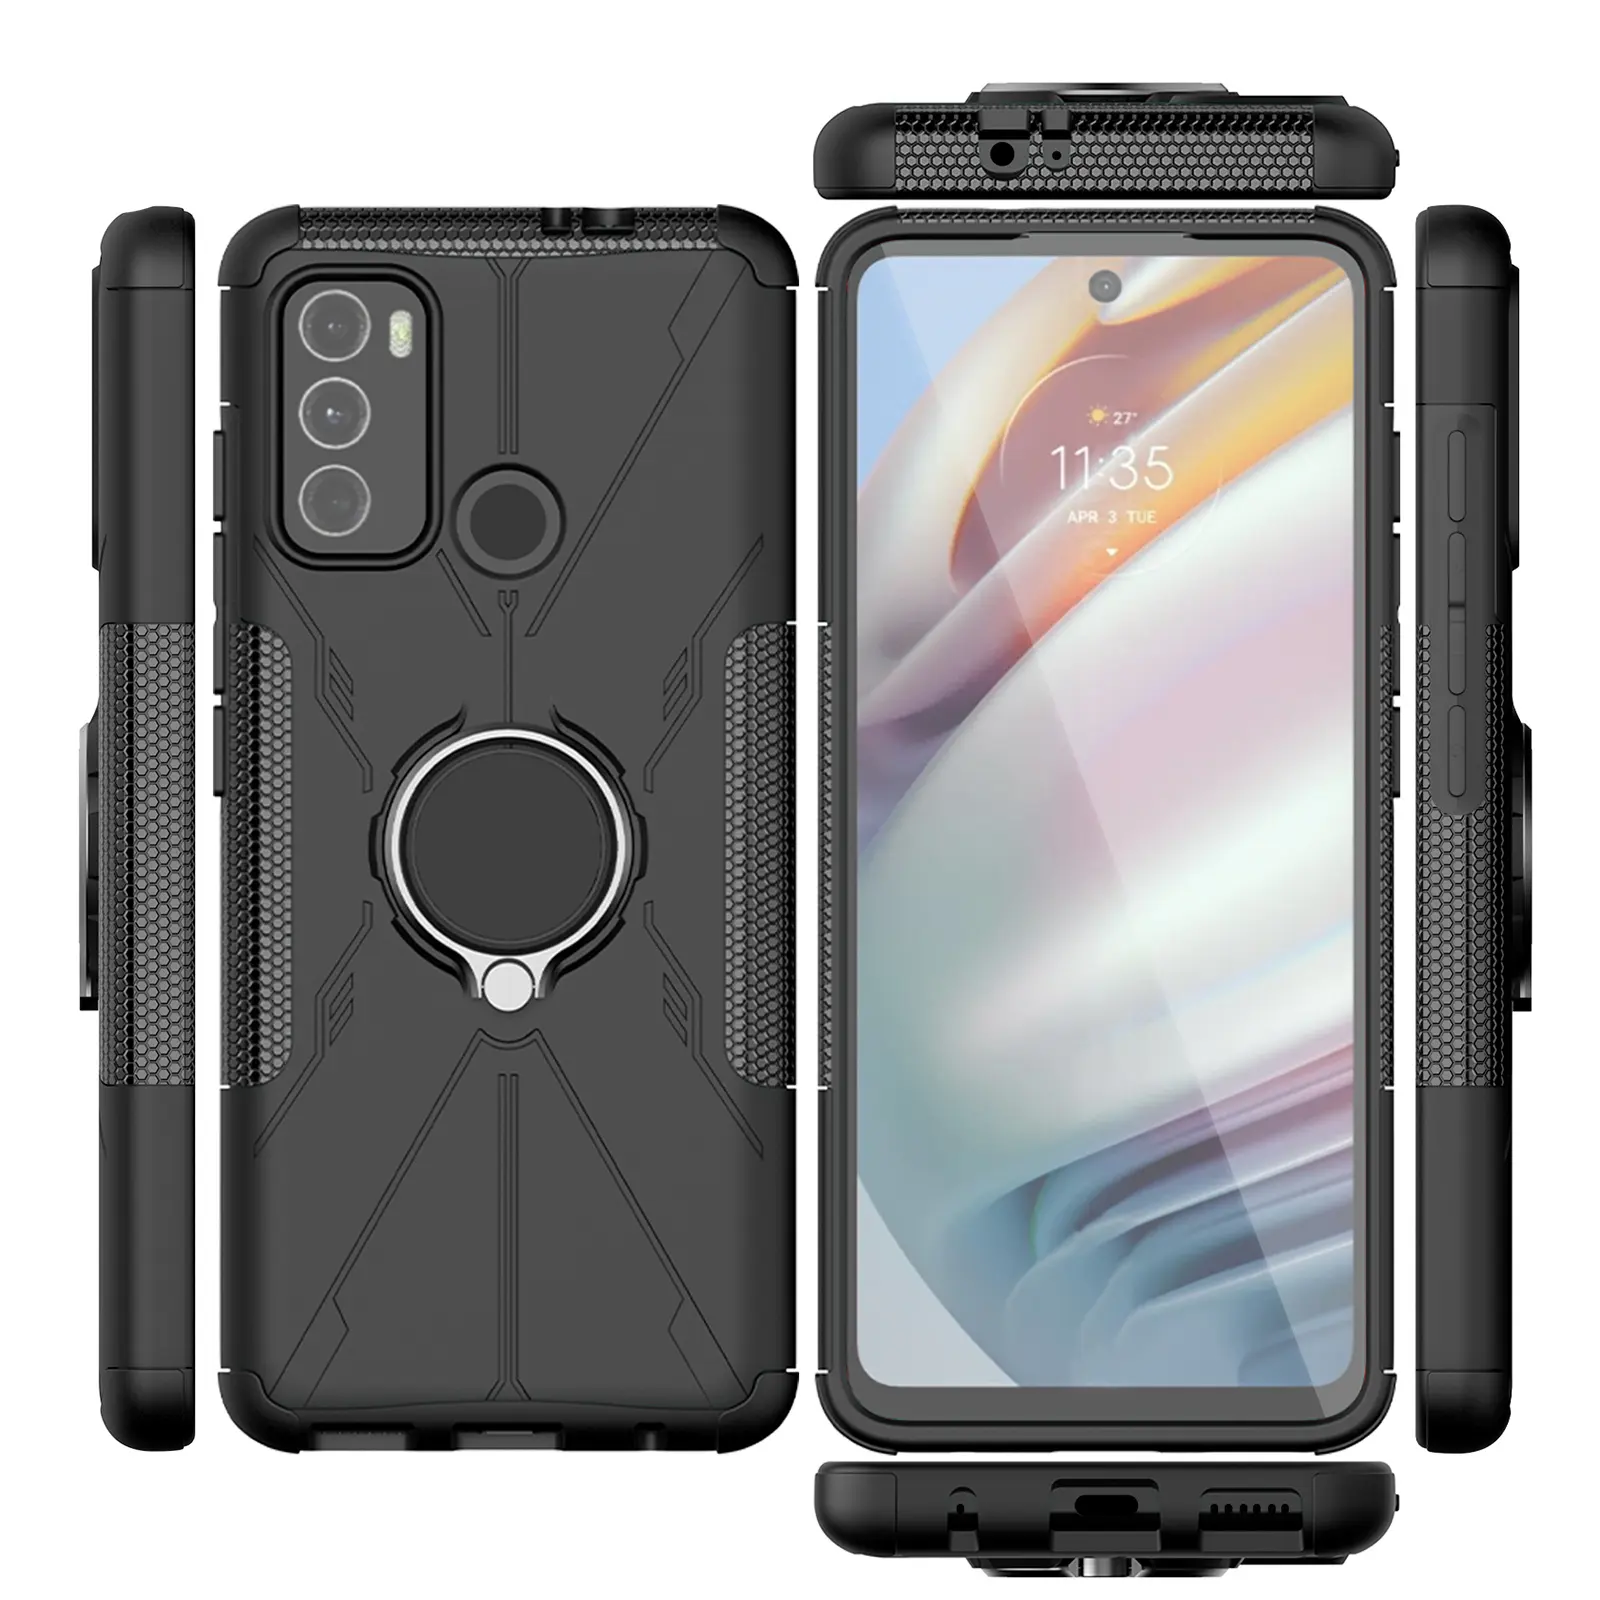 Heavy Duty Mobile Phone Rugged Spin Kickstand Rugged Armor Case Soft TPU PC Cover Shell For Motorola Moto G60 (6.78") Skin